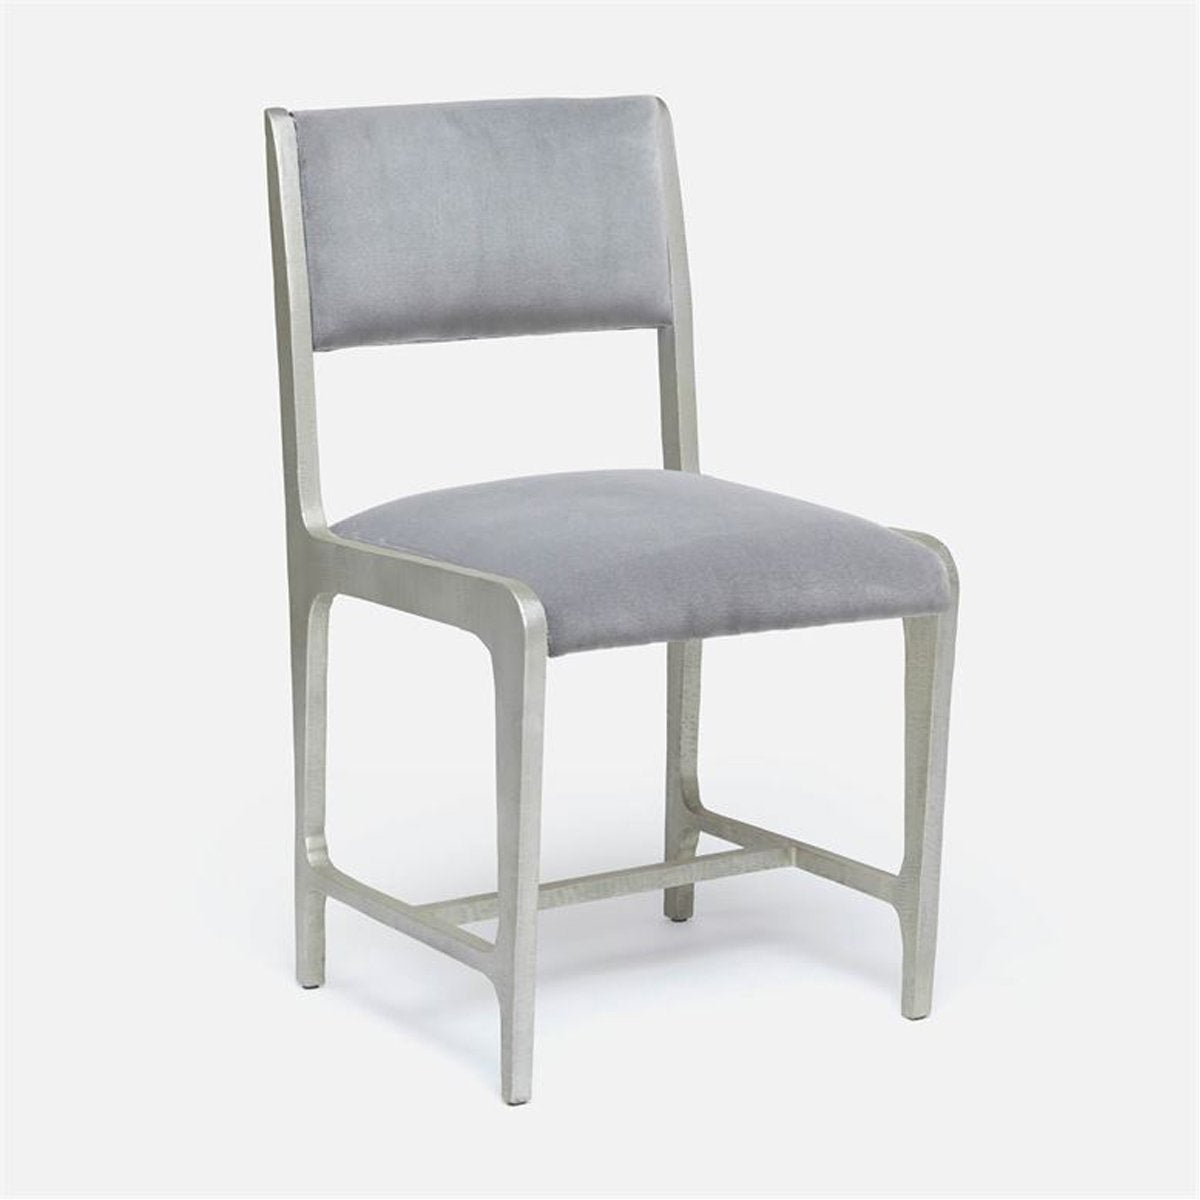 Made Goods Vallois Contemporary Metal Side Chair, Brenta Cotton Jute